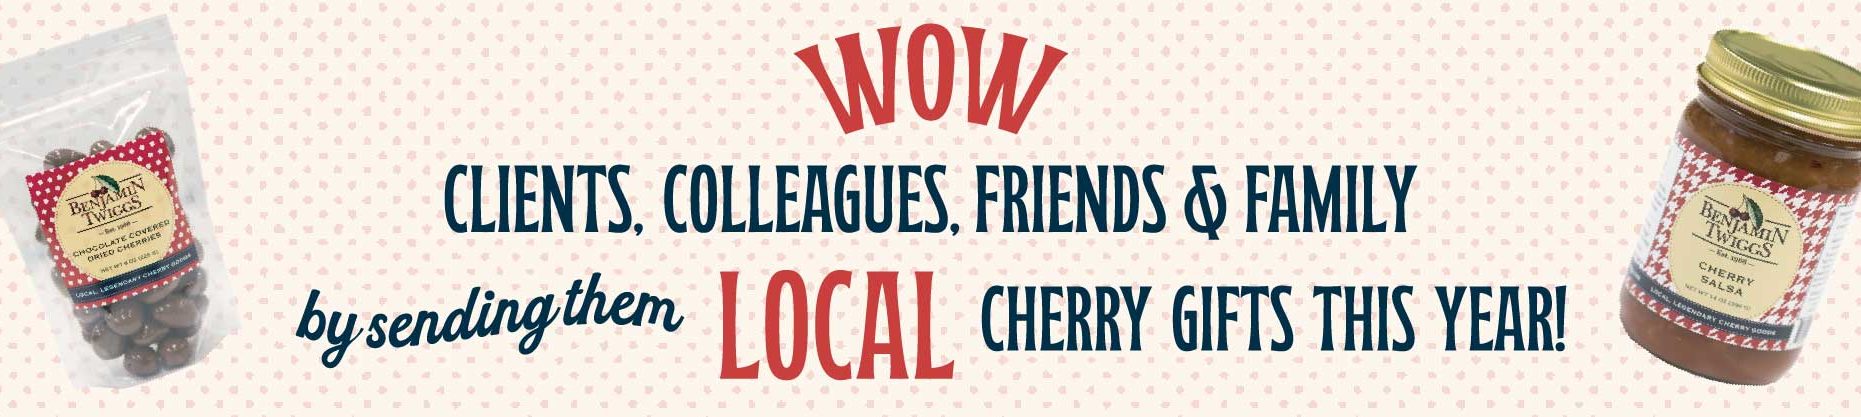 Send Local Cherry Gifts